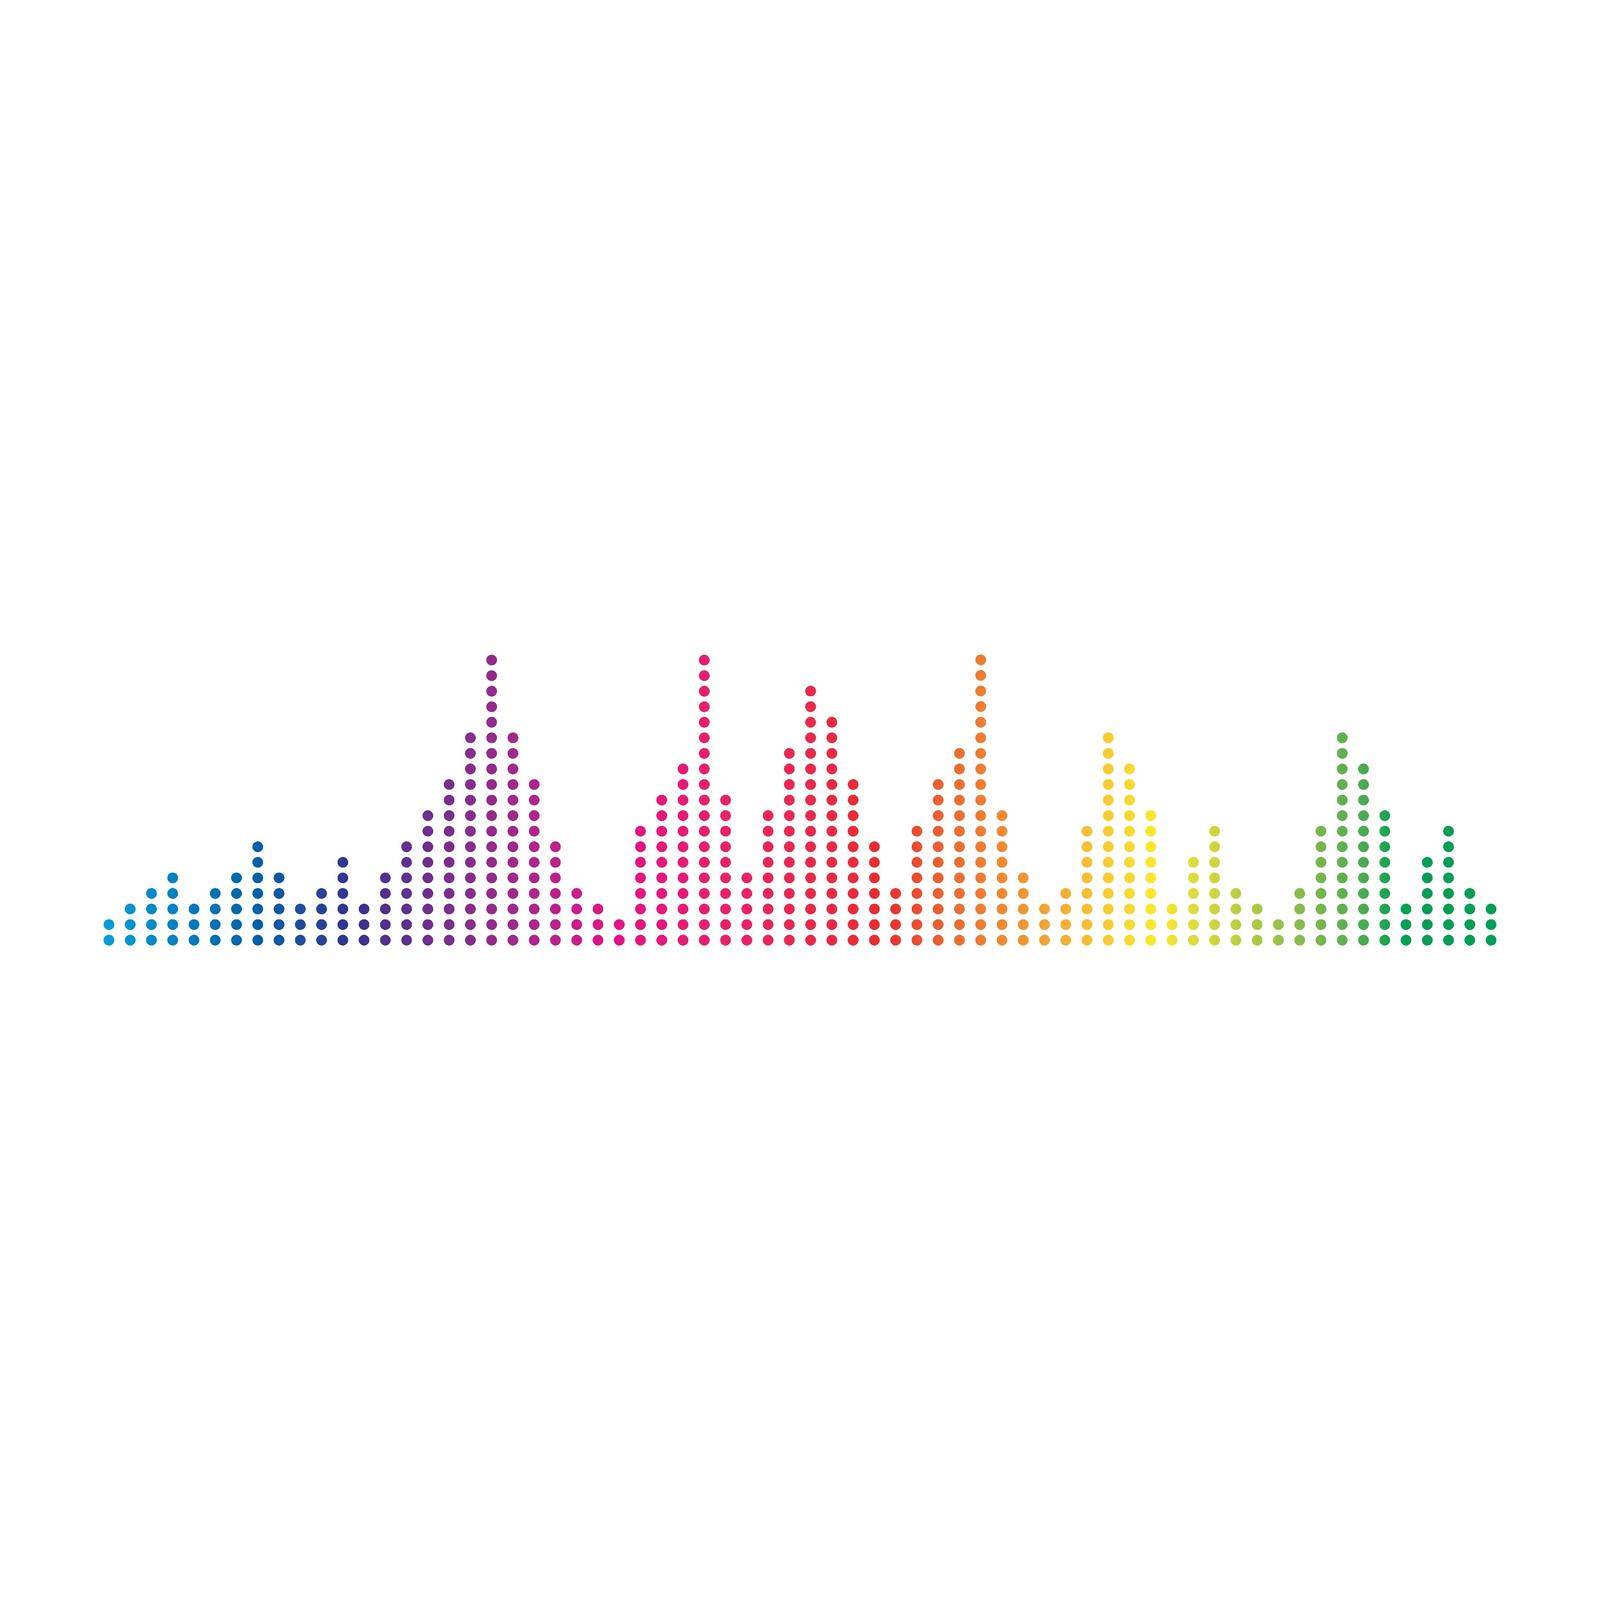 Audio technology, music sound waves vector icon by ichadsgn